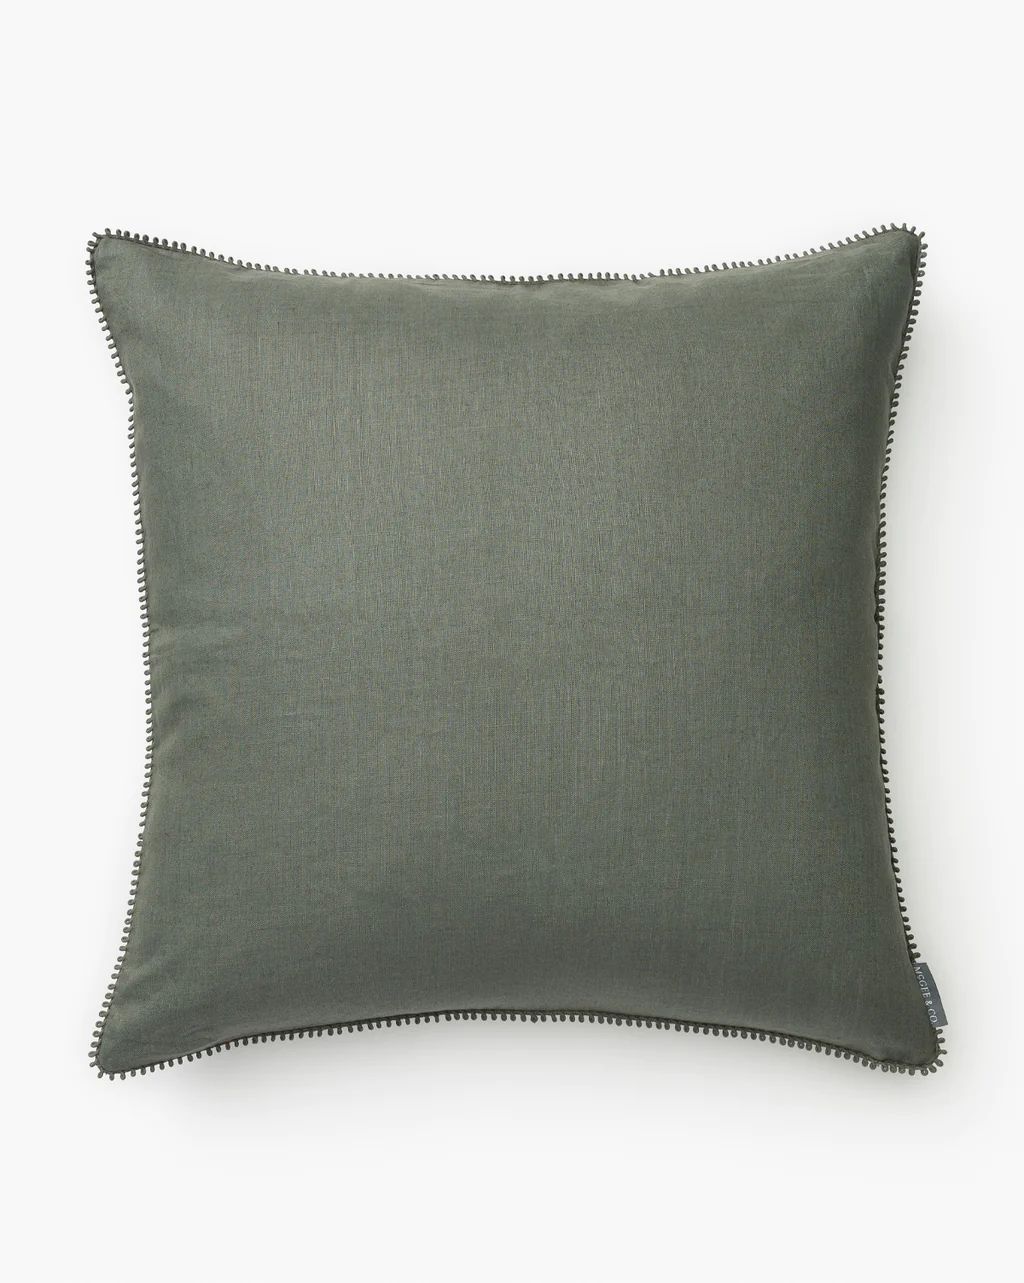 Pennywood Pillow Cover | McGee & Co.